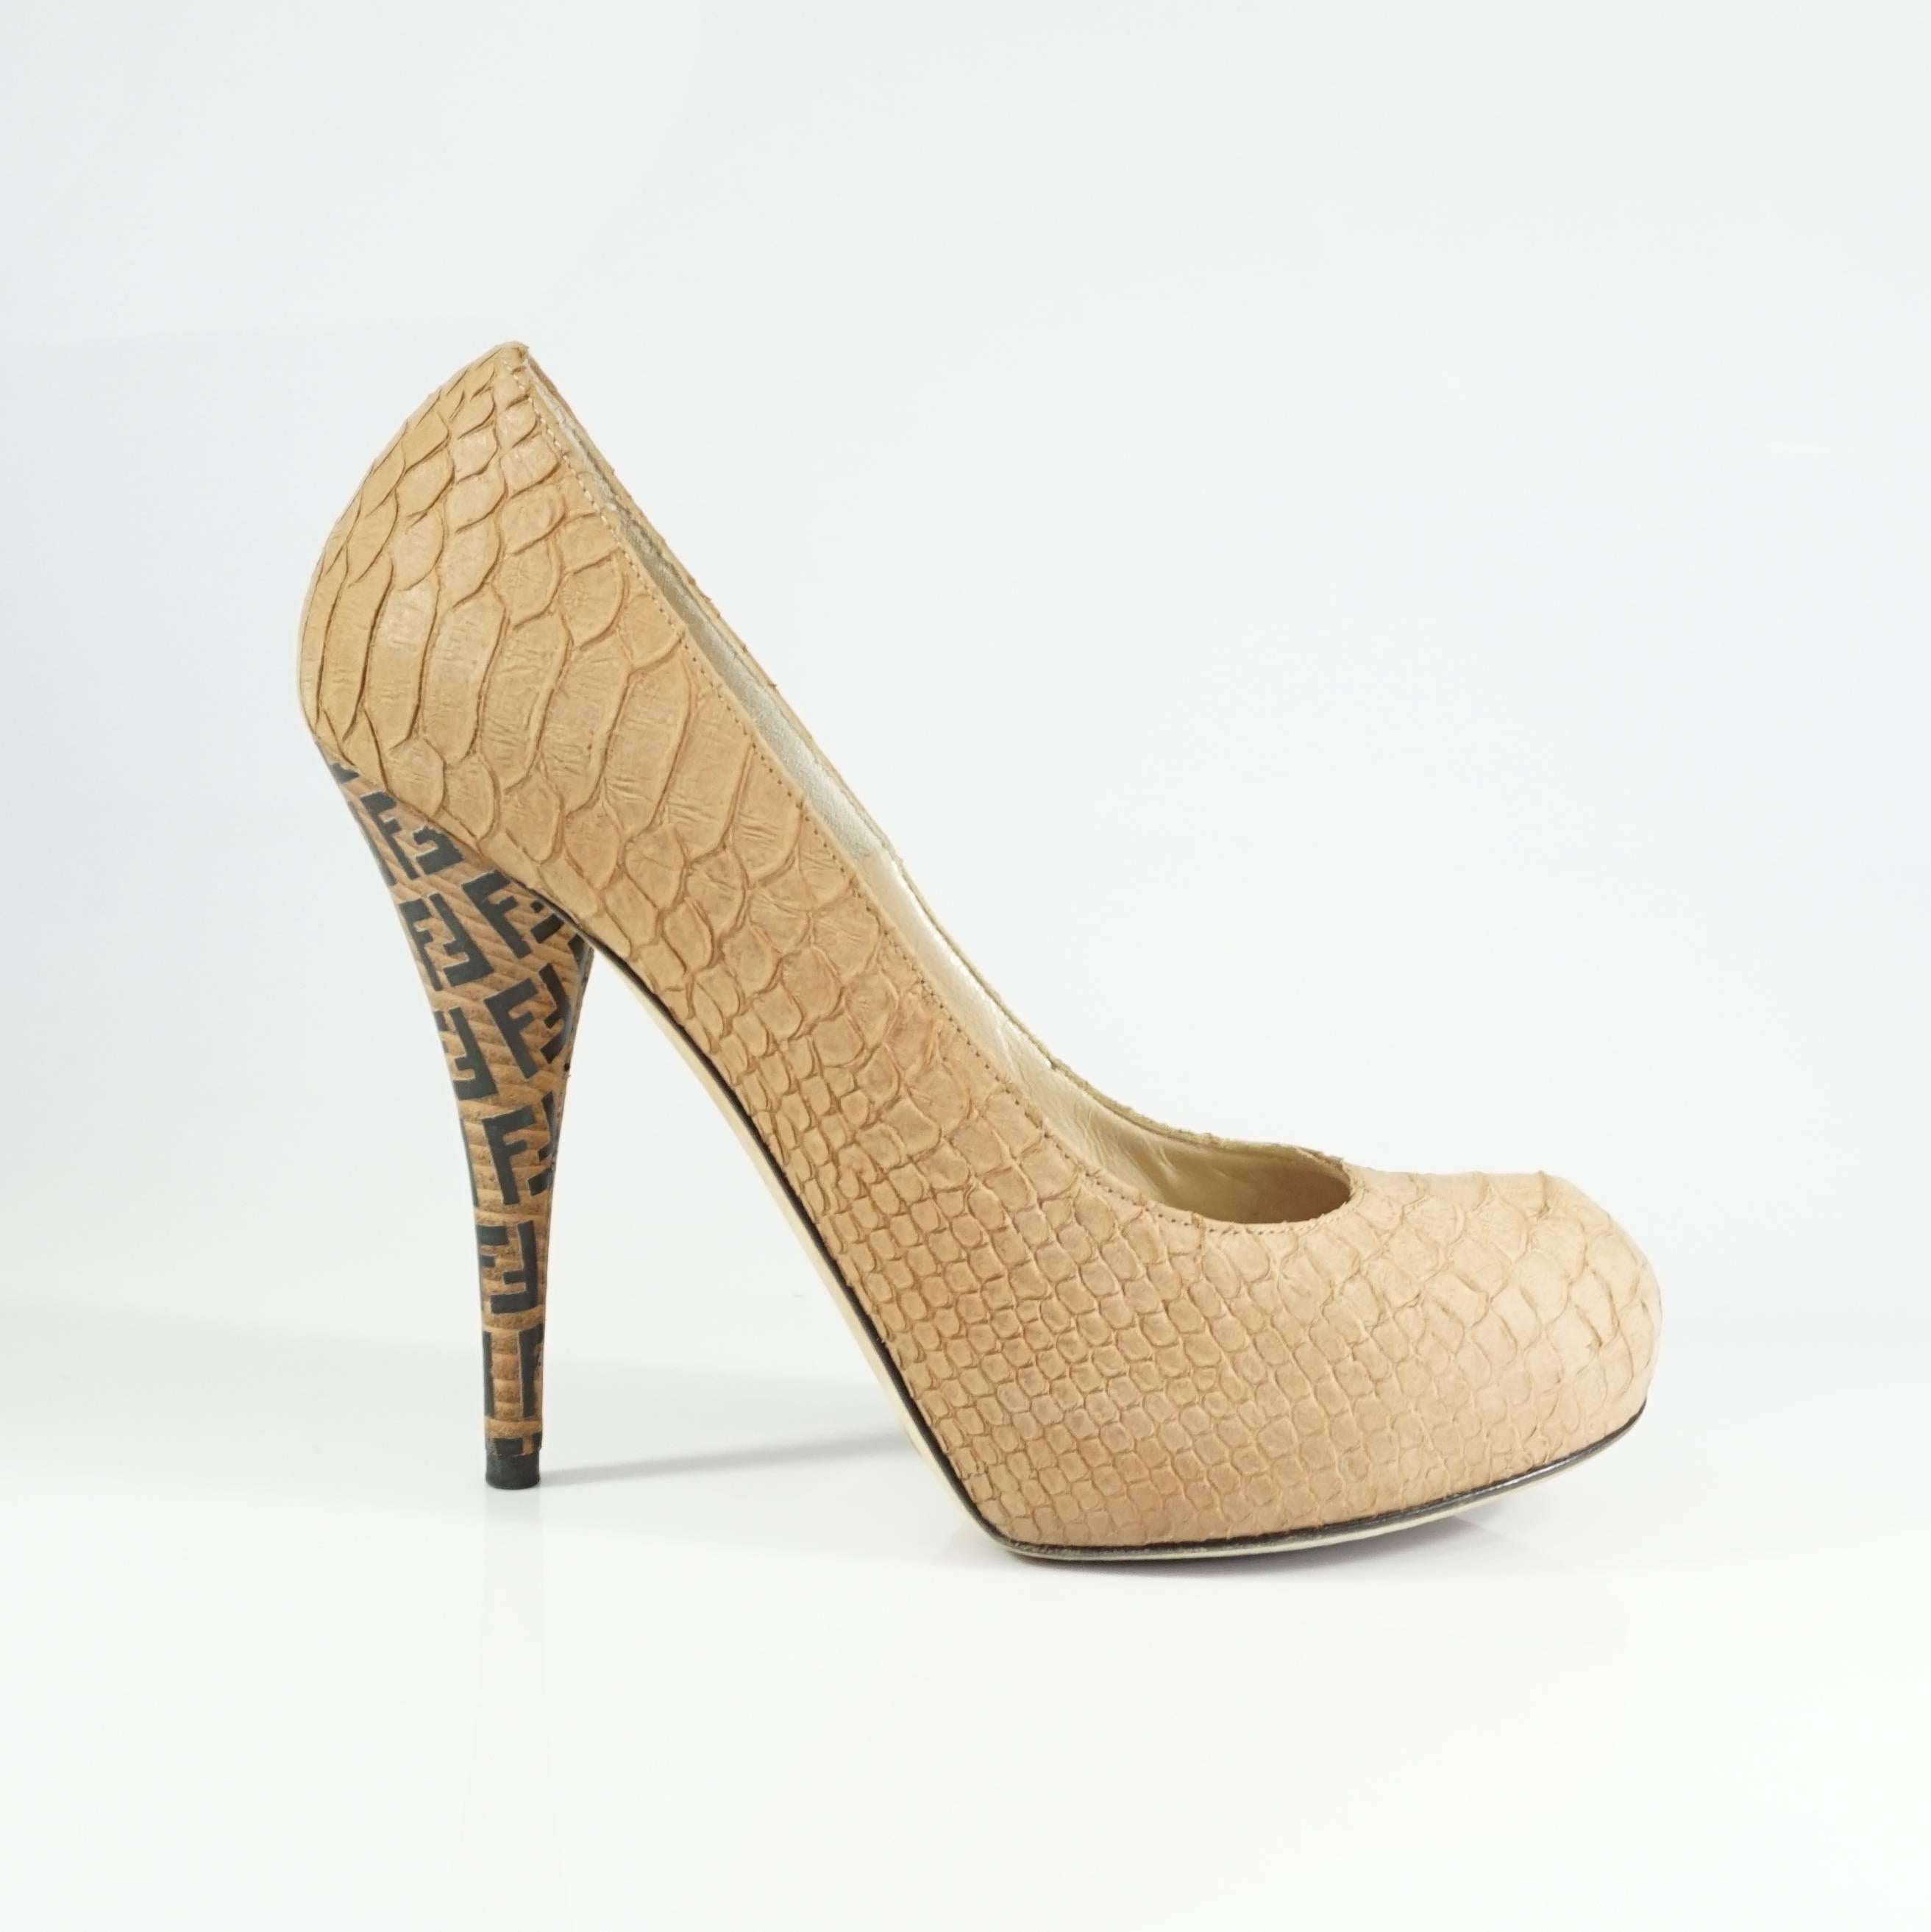 Fendi Nude Snakeskin Pumps with 